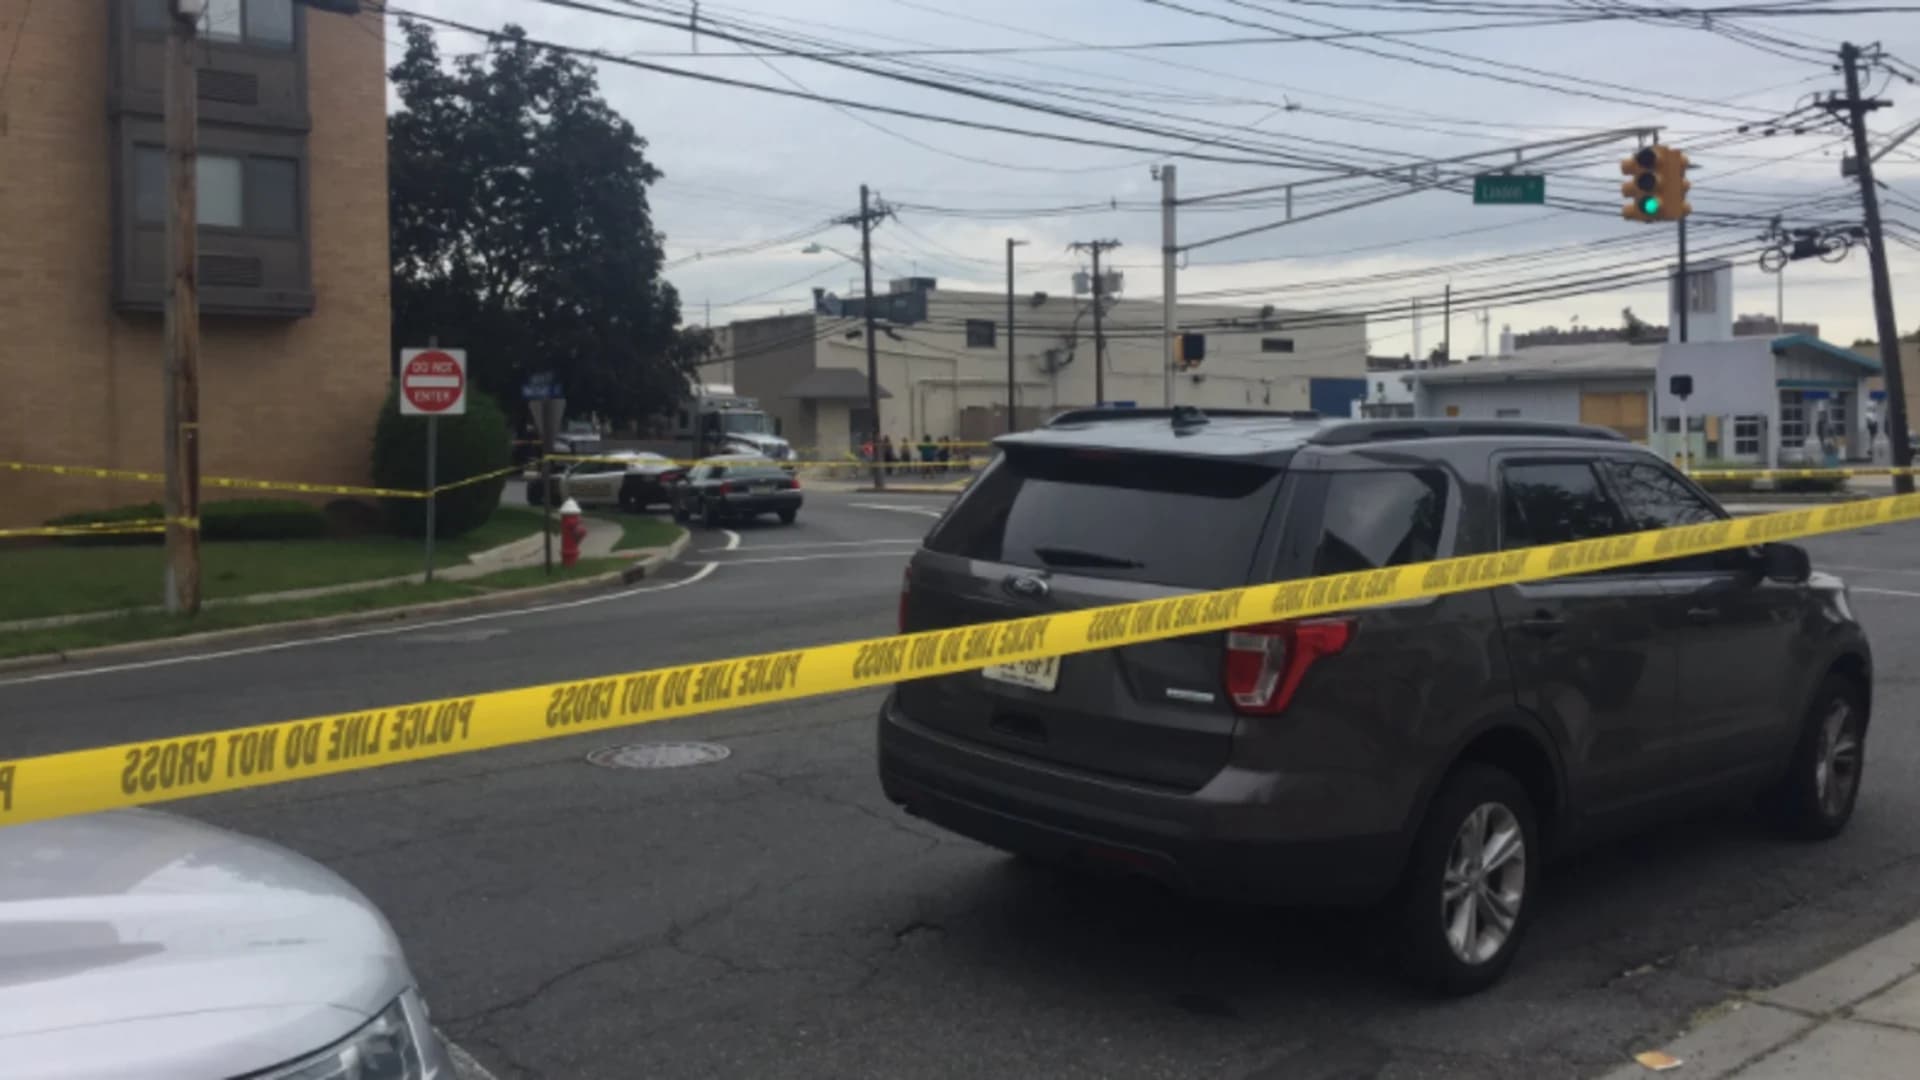 Officials ID neighbors involved in Hackensack murder-suicide